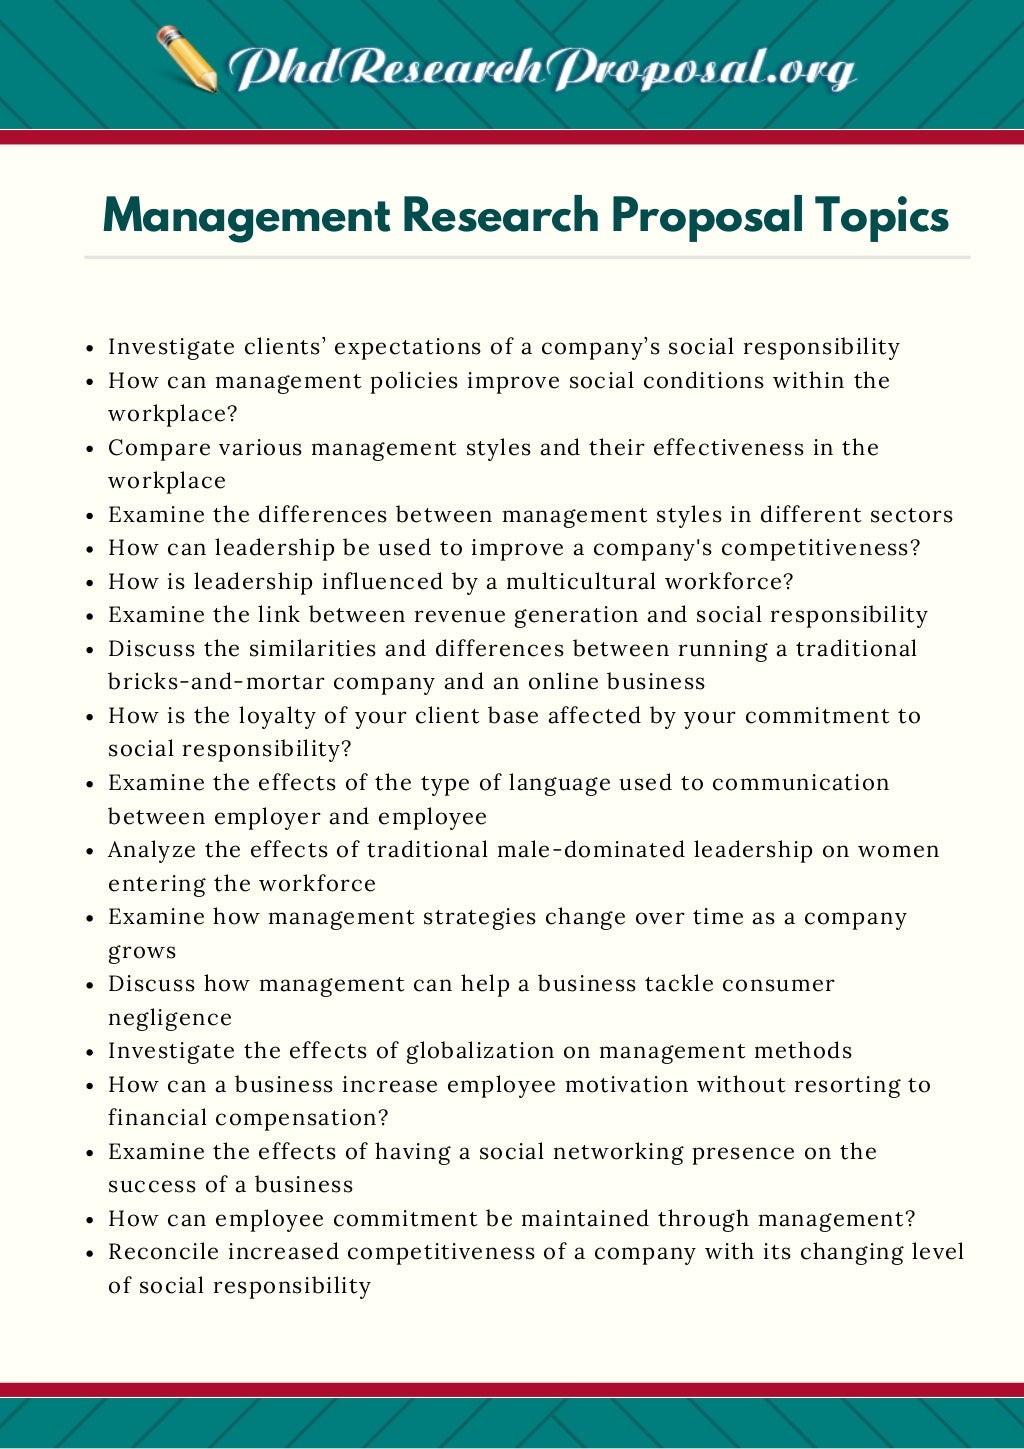 research proposal on management information system